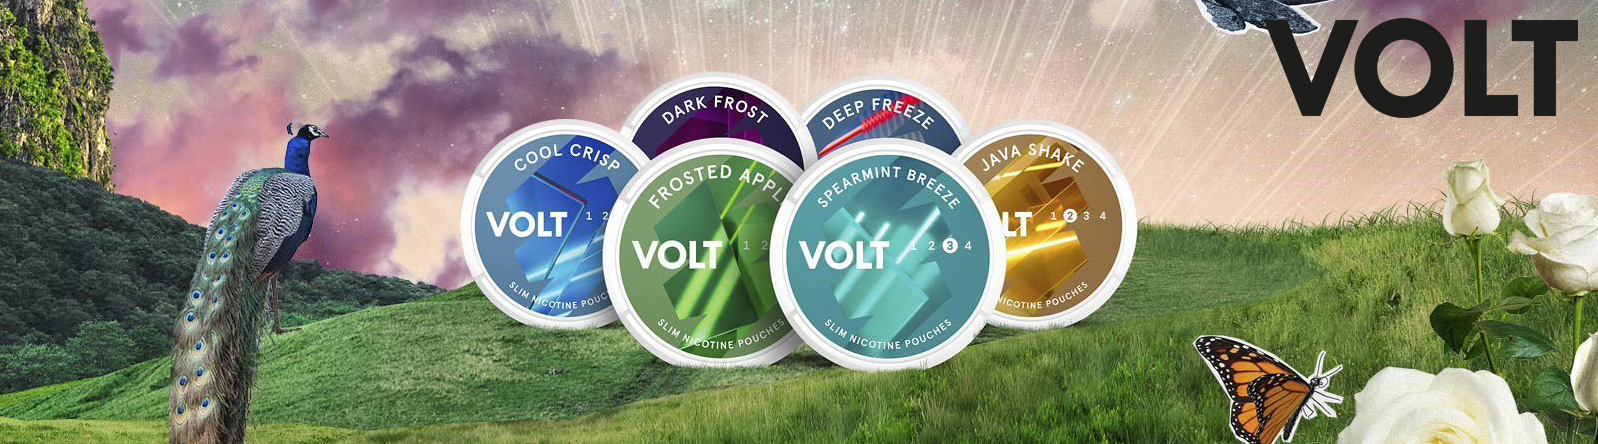 New VOLT from SM at Snus24